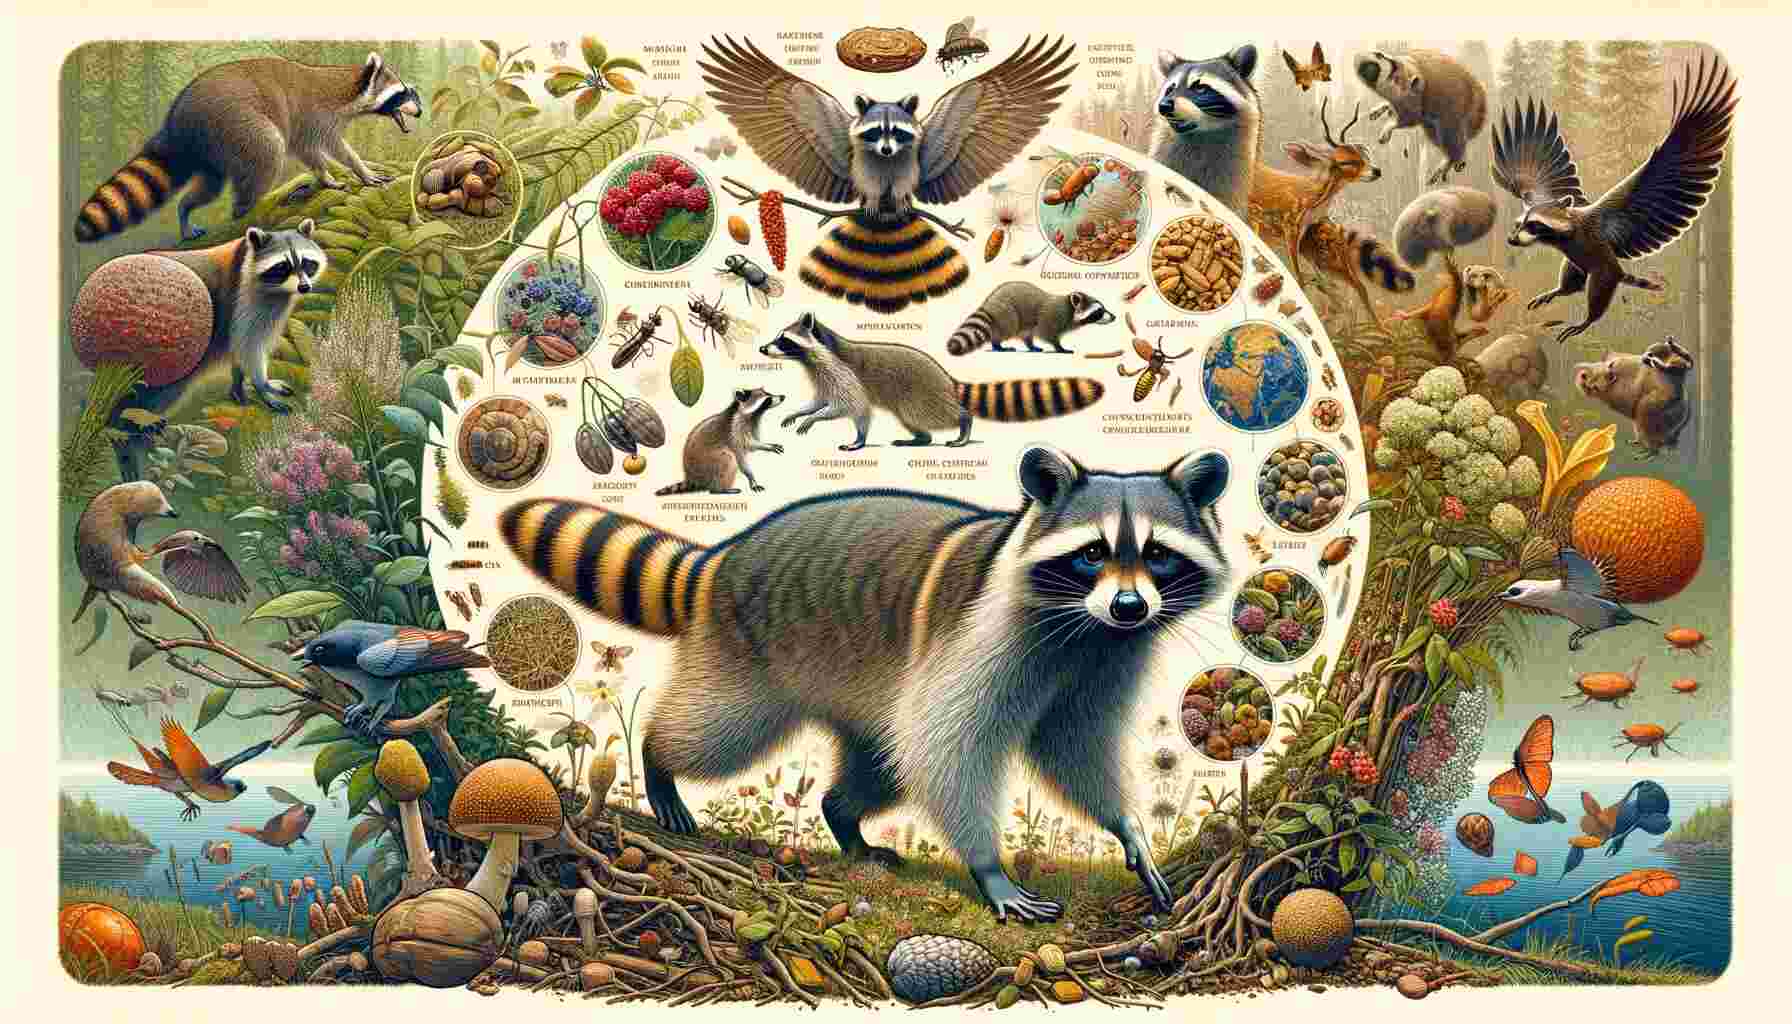 Here is an illustration depicting raccoons as a keystone species in their ecosystem. It visually represents the role of raccoons in maintaining ecological balance, including their impact on food chains and their contribution to seed dispersal. The image shows a raccoon interacting with various elements of the ecosystem, such as preying on small mammals or insects, foraging for fruits and nuts, and inadvertently dispersing seeds. The background includes a diverse range of flora and fauna, illustrating the interconnectedness of the raccoon with different species and the environment, conveying the ecological importance of raccoons.